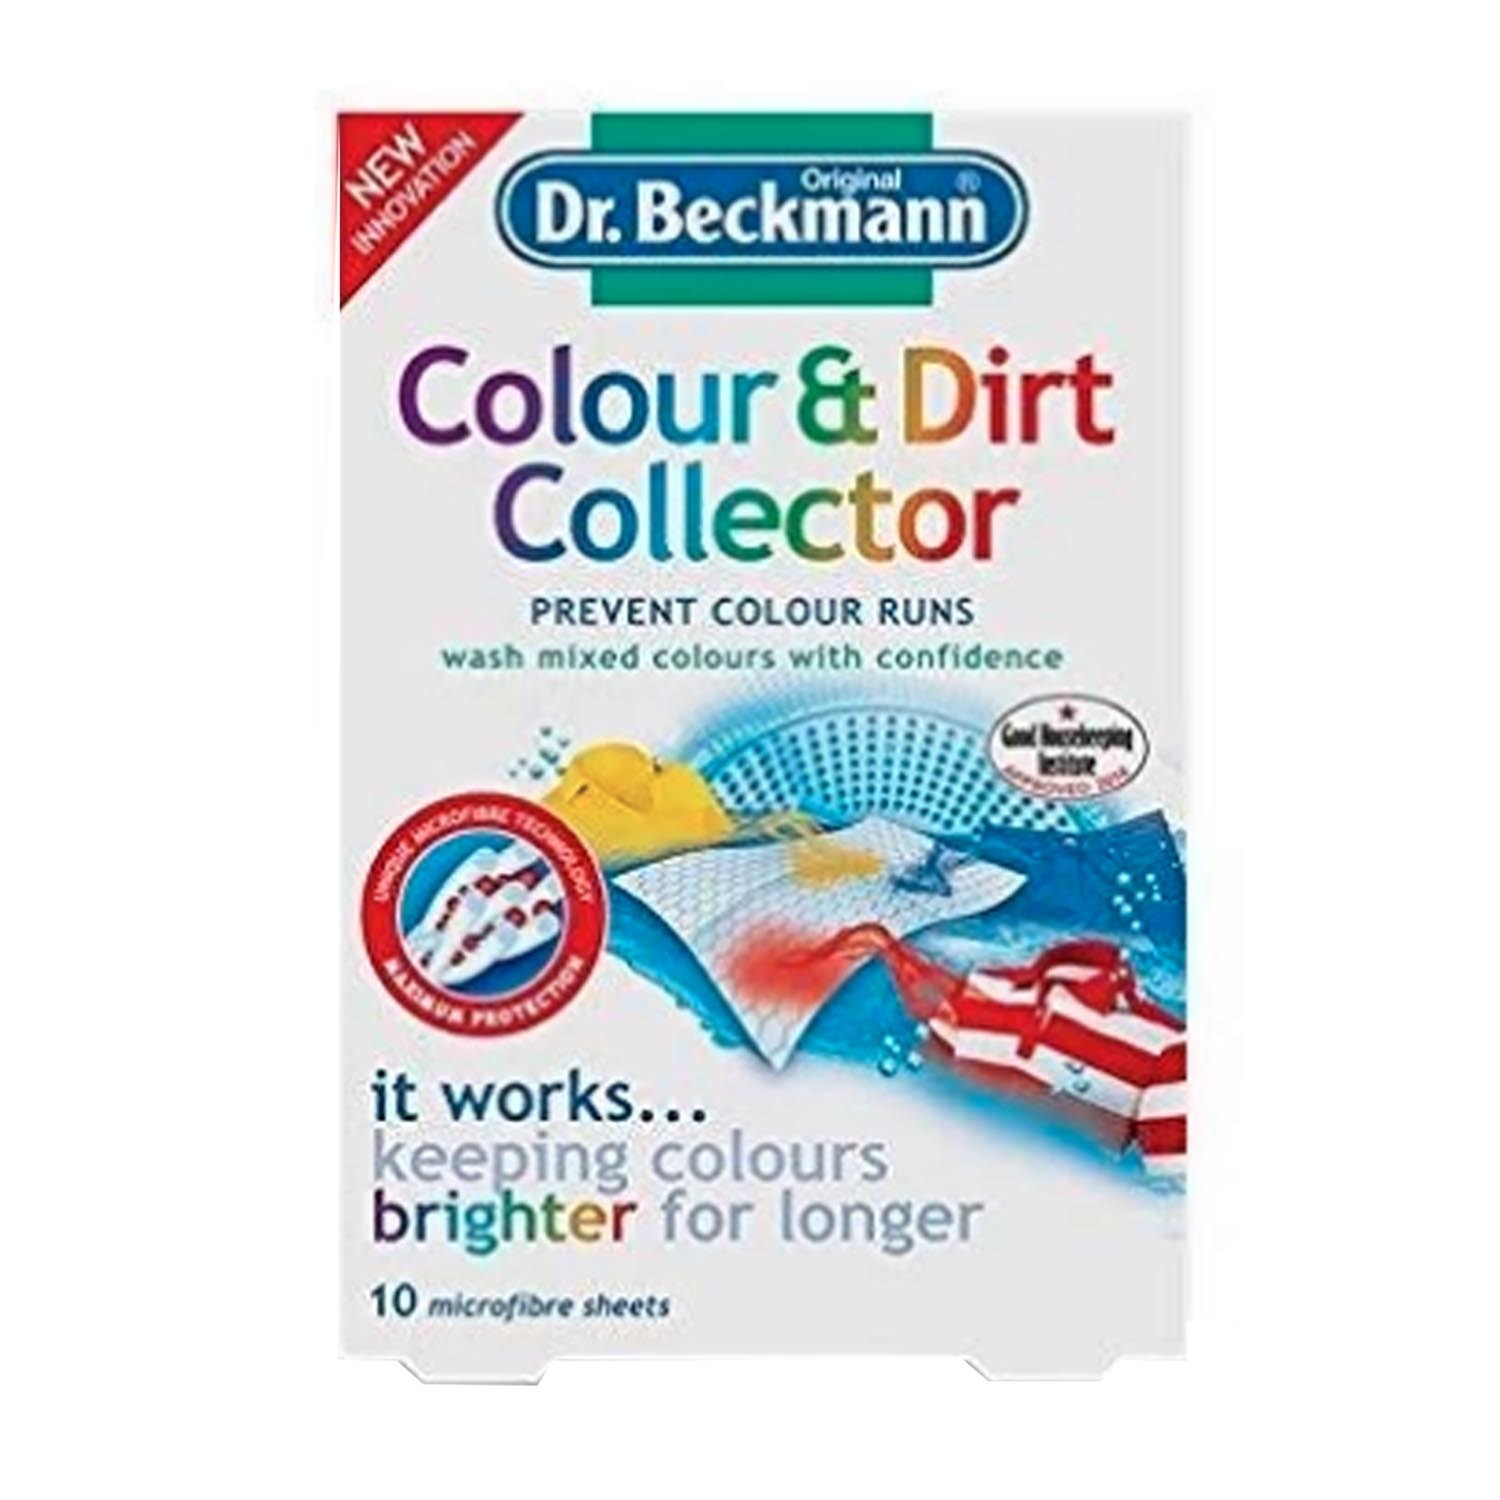 Dr Beckmann Colour and Dirt Collector Sheets Image